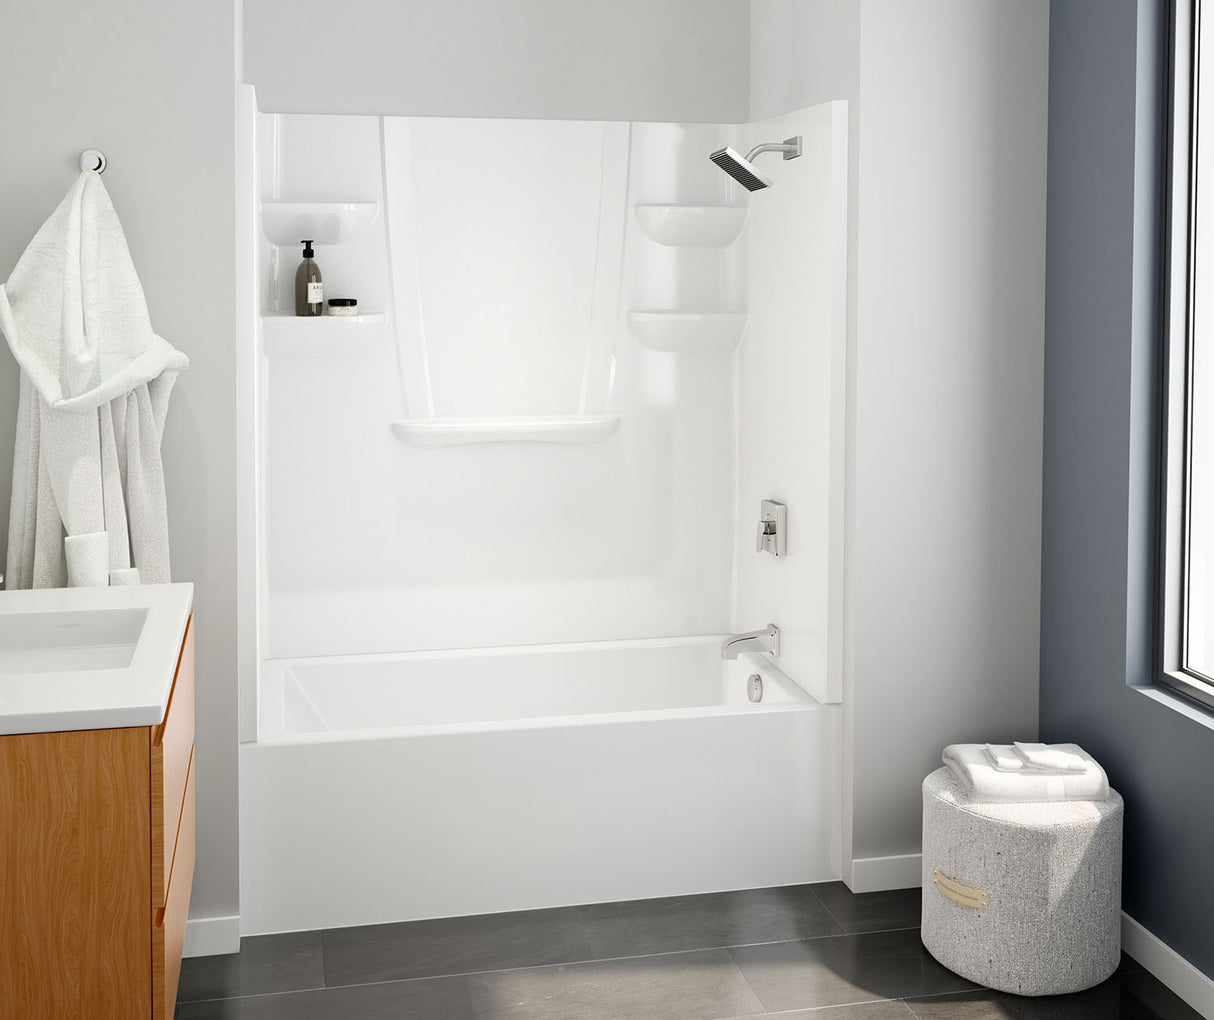 Swanstone VP6030CTSMINAL/R 60 x 30 Solid Surface Alcove Right Hand Drain Four Piece Tub Shower in White VP6030CTSMINAR.010